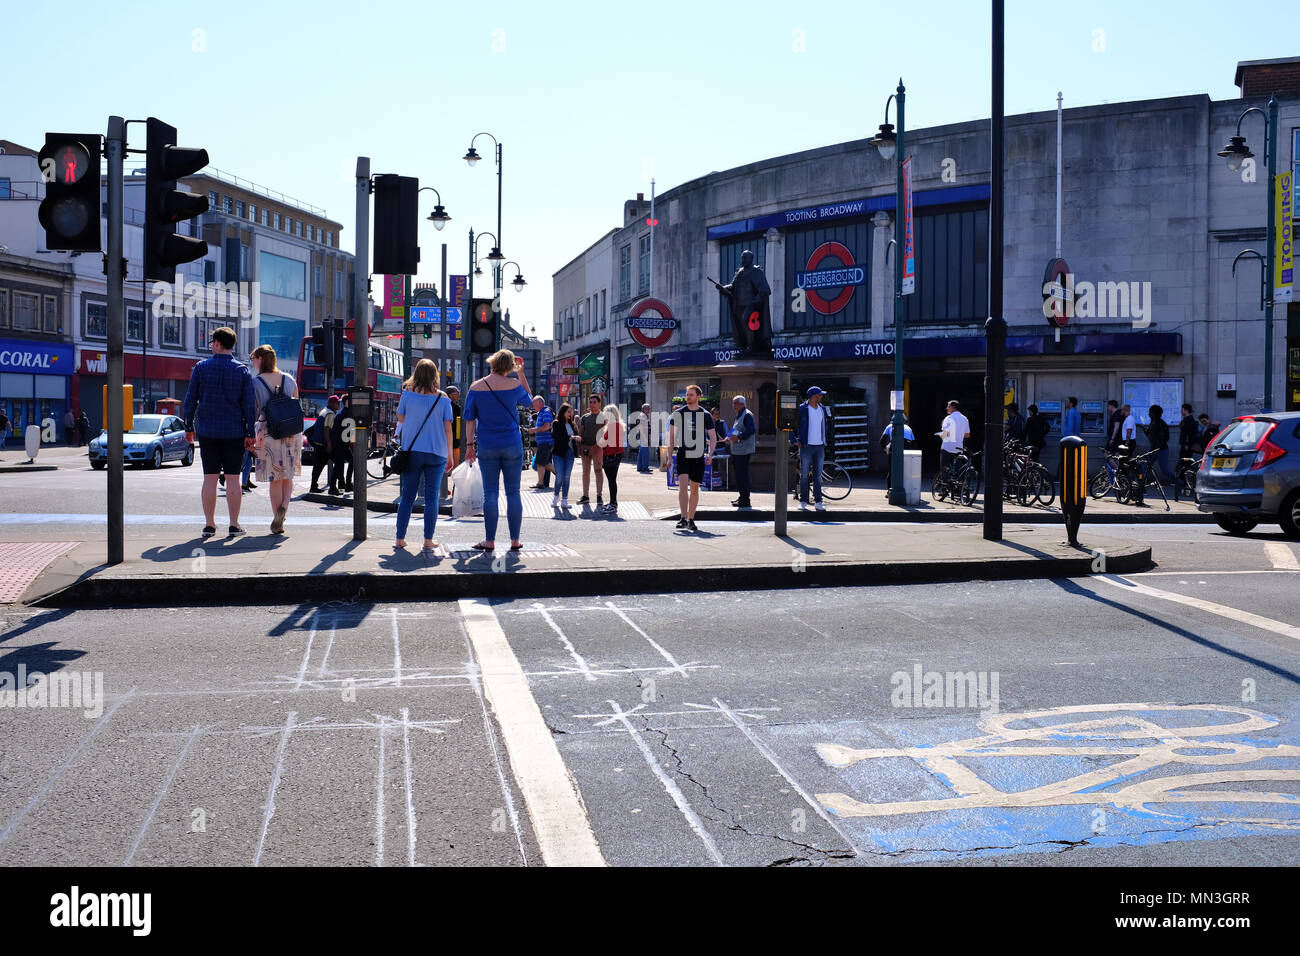 Tooting Broadway tube station, Tooting High St, Londra, Regno Unito Foto Stock